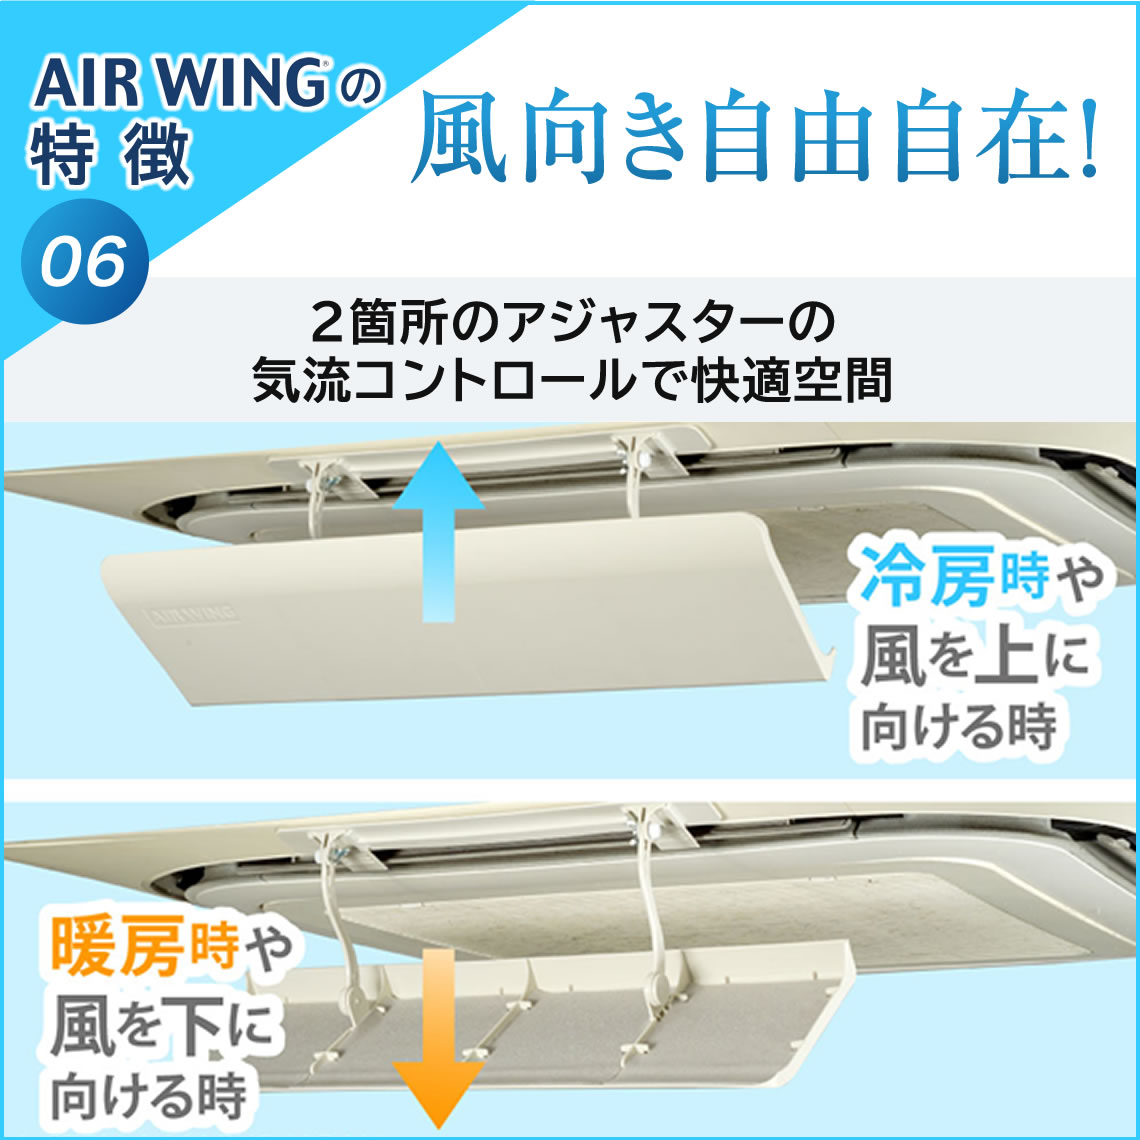 AIR WINGの特徴06 風向き自由自在！